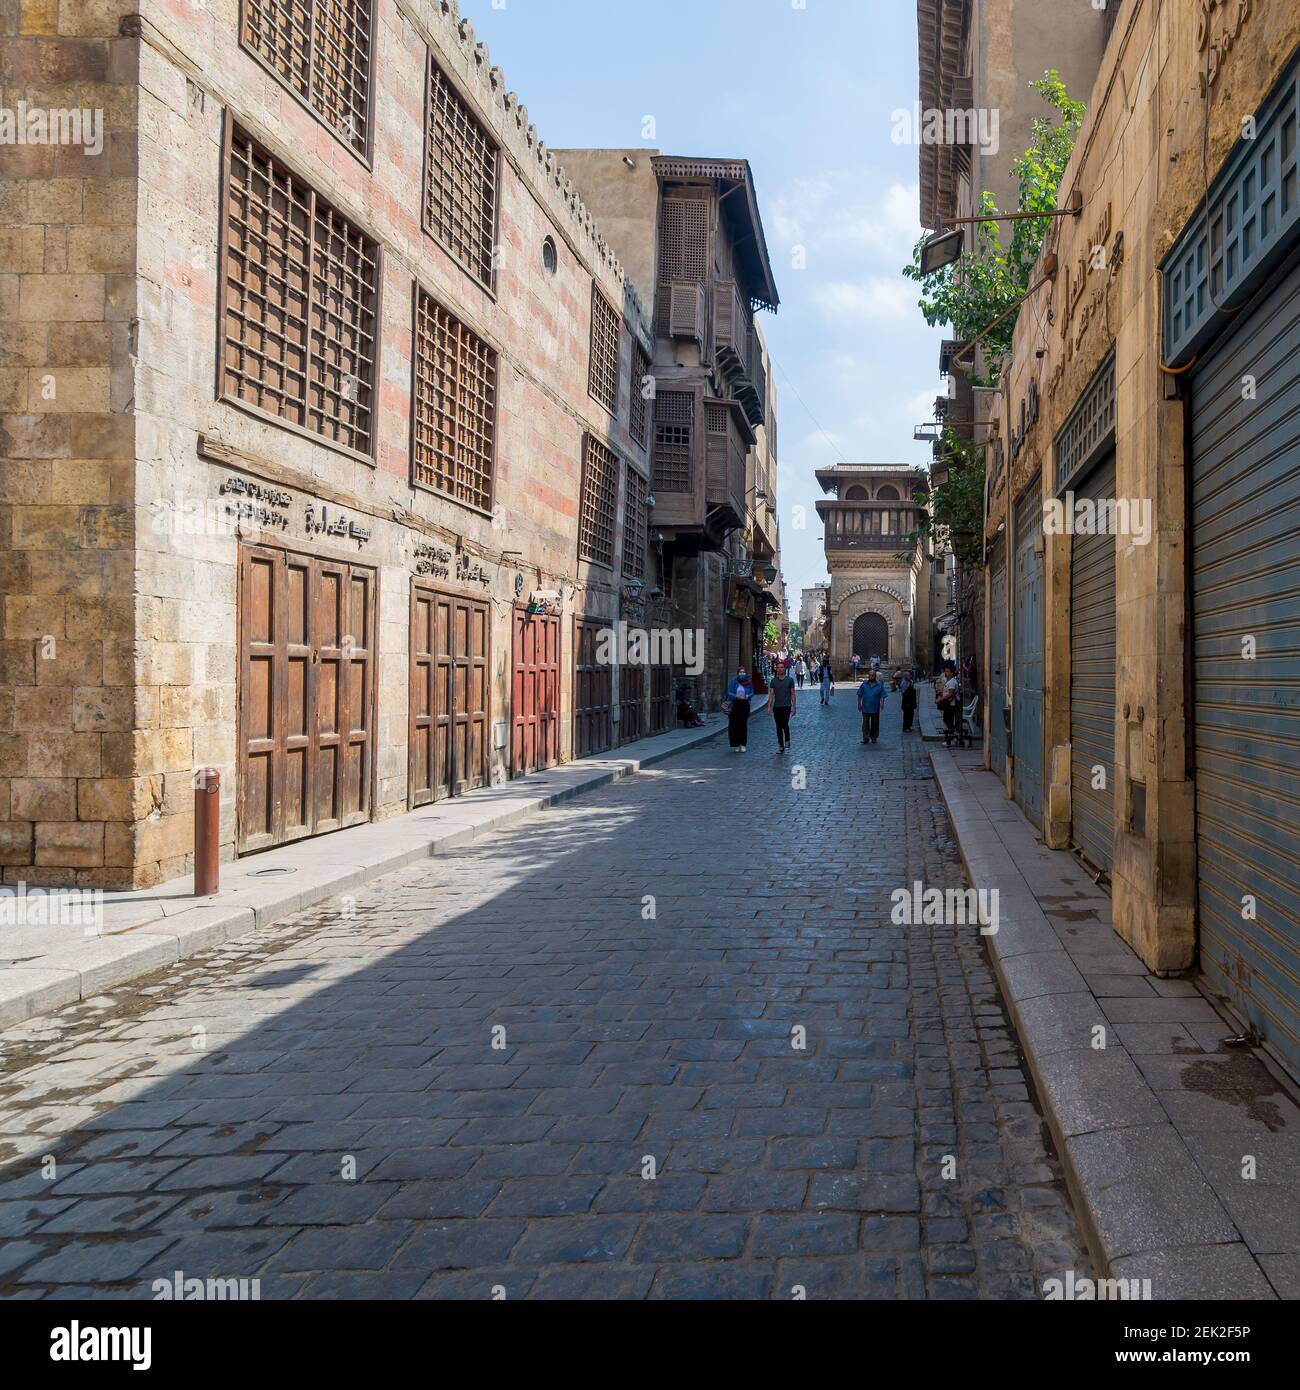 Cairo, Egypt- June 26 2020: Moez Street with few local visitors and Sabil-Kuttab of Katkhuda Mamluk era historic building at the far end during Covid-19 lockdown period, Gamalia district, Old Cairo Stock Photo